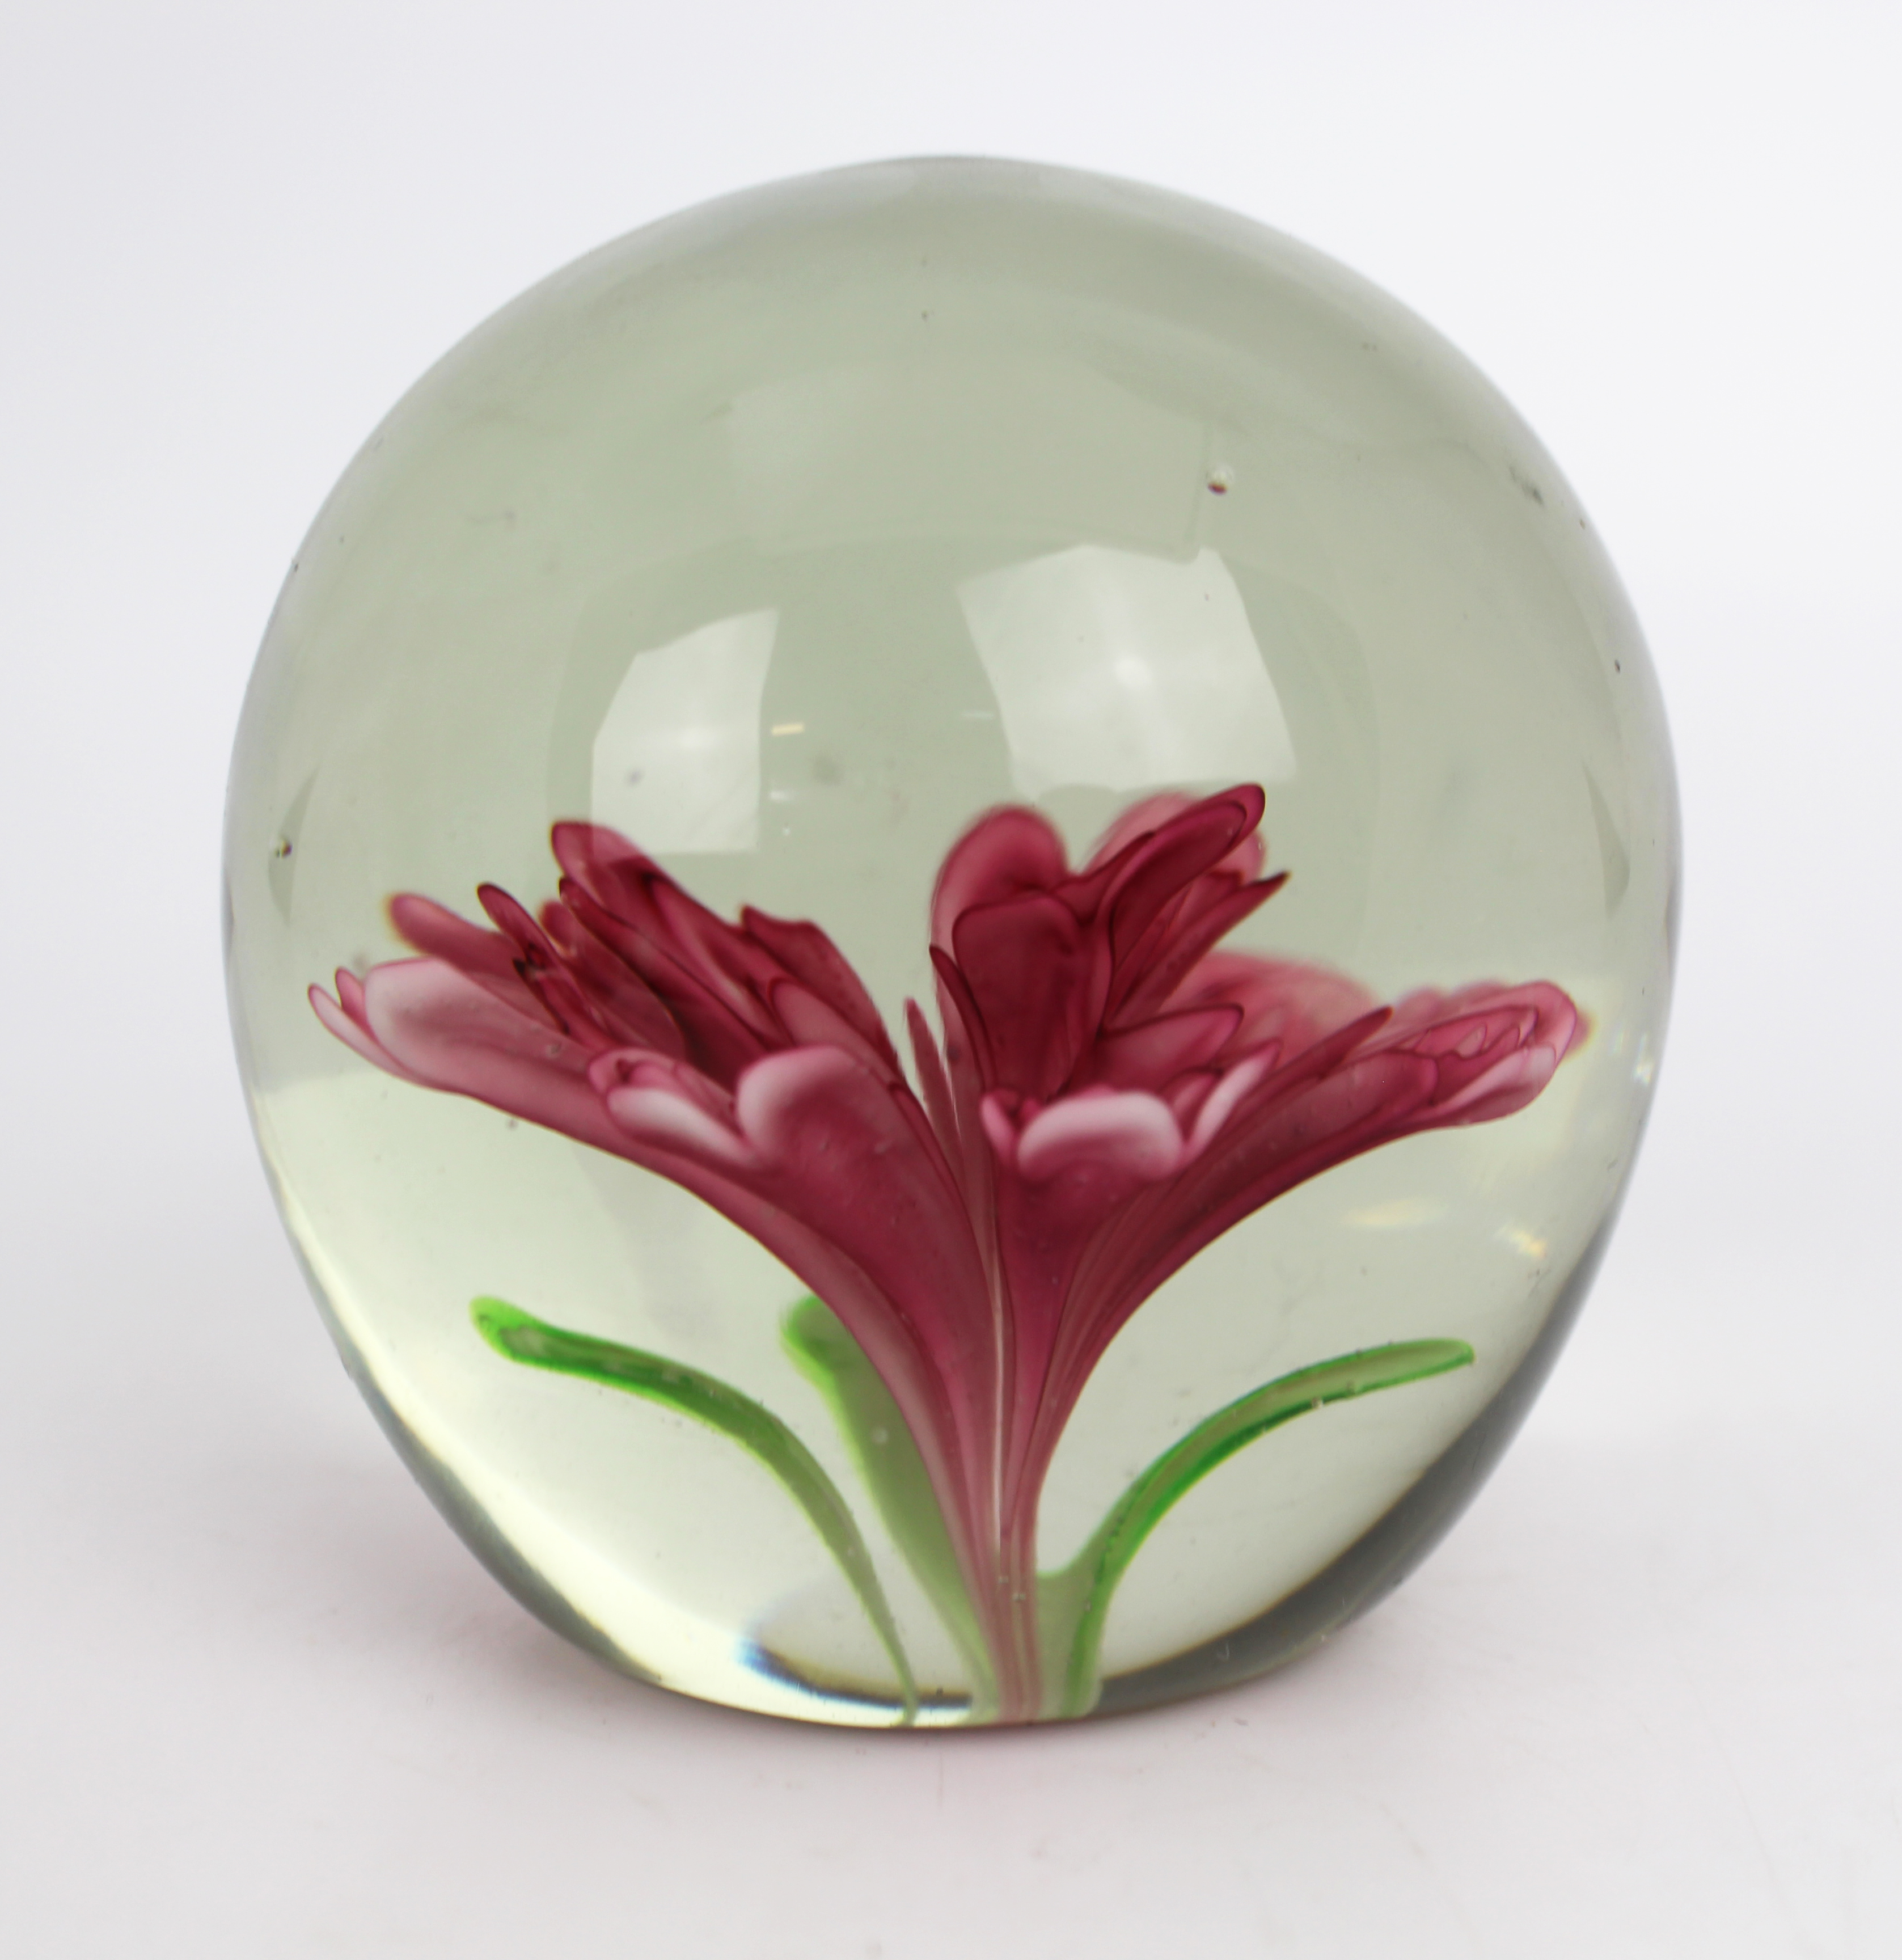 Vintage Glass Flower Paperweight - Image 2 of 2